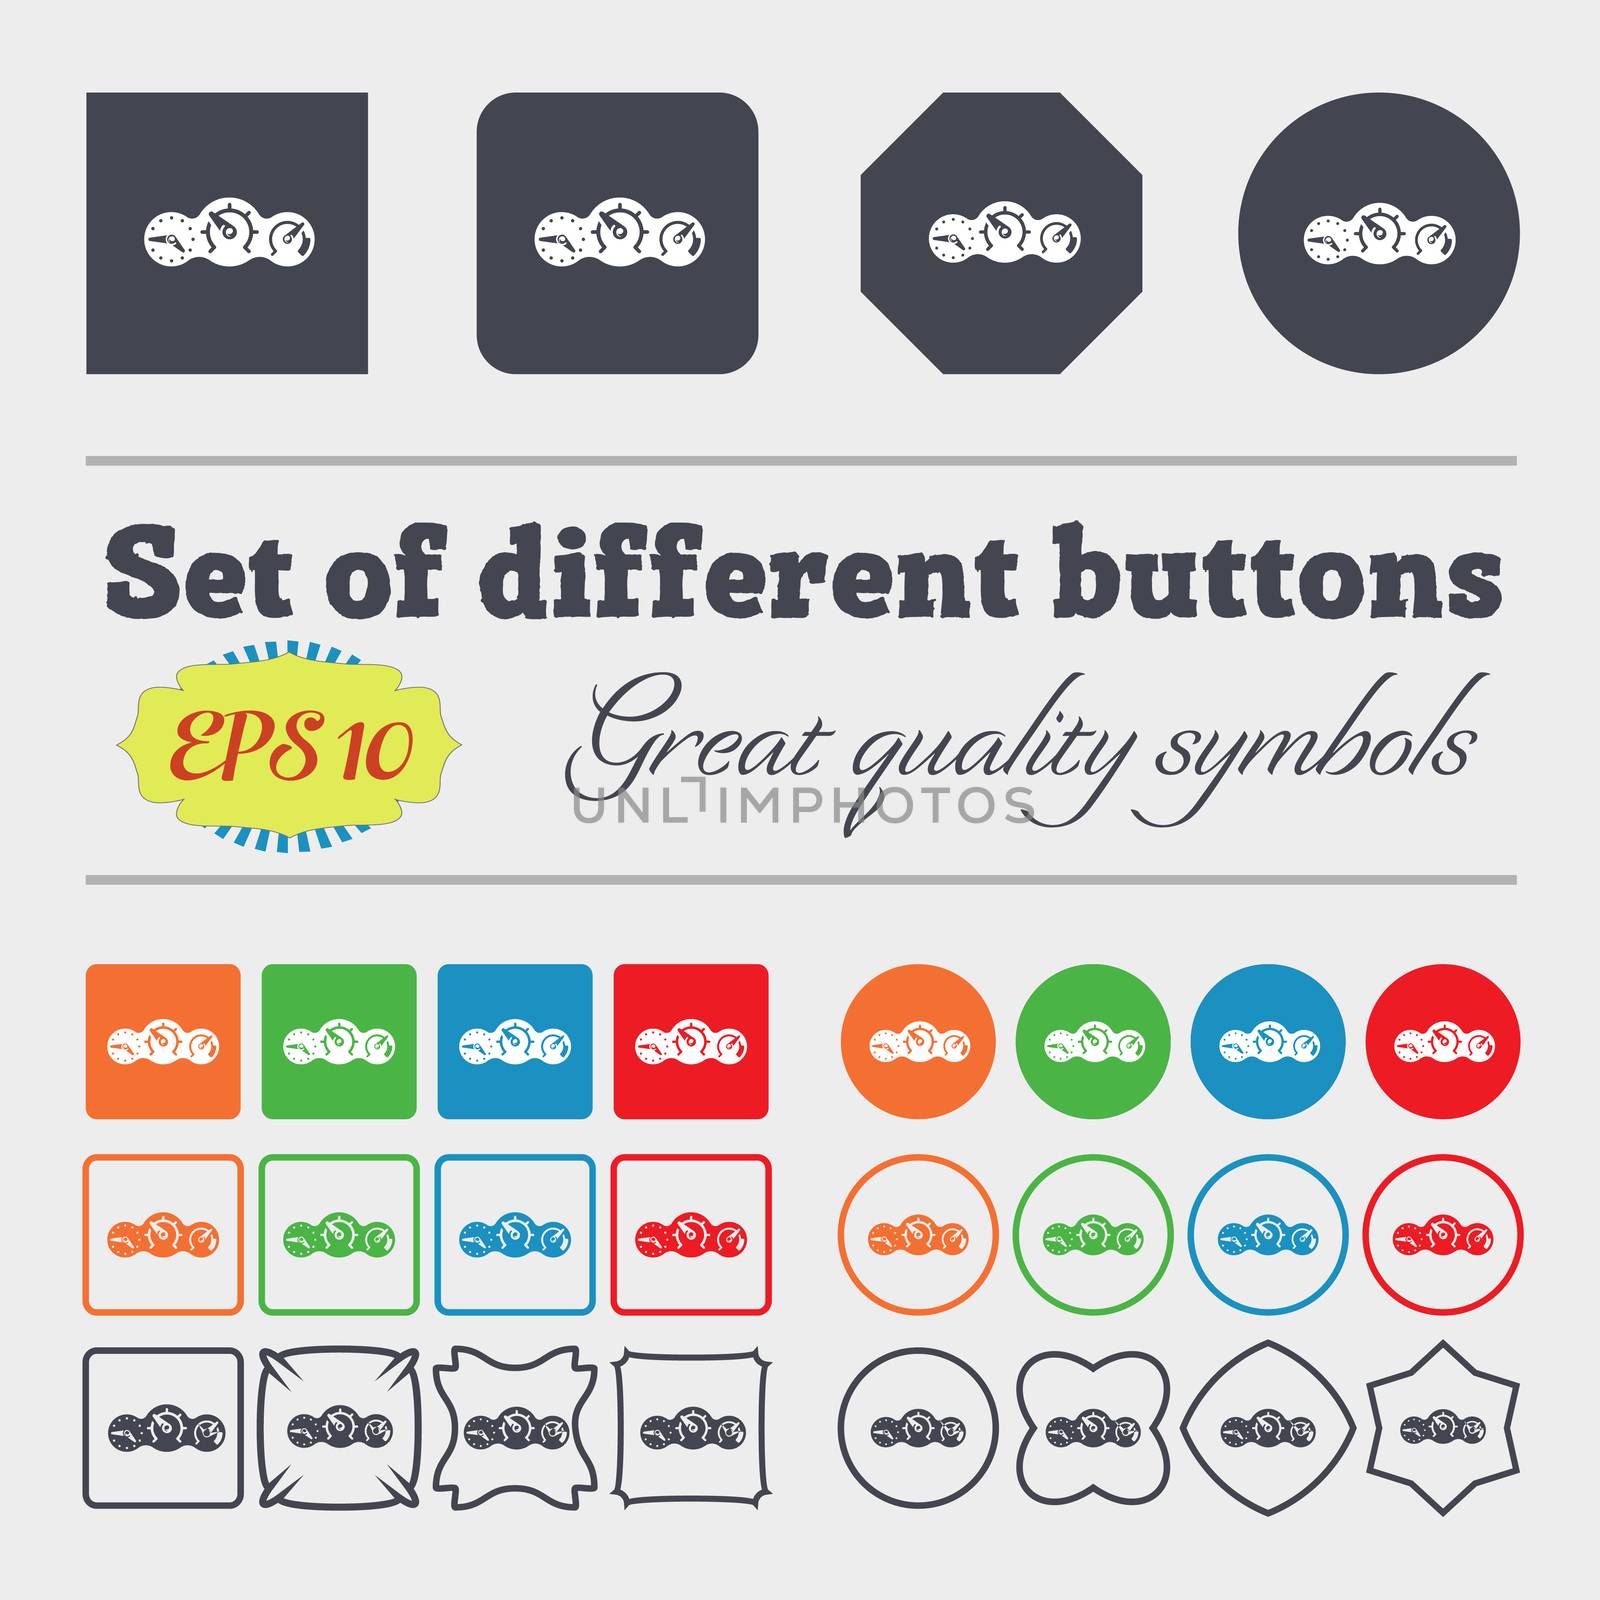 speed, speedometer icon sign. Big set of colorful, diverse, high-quality buttons. illustration